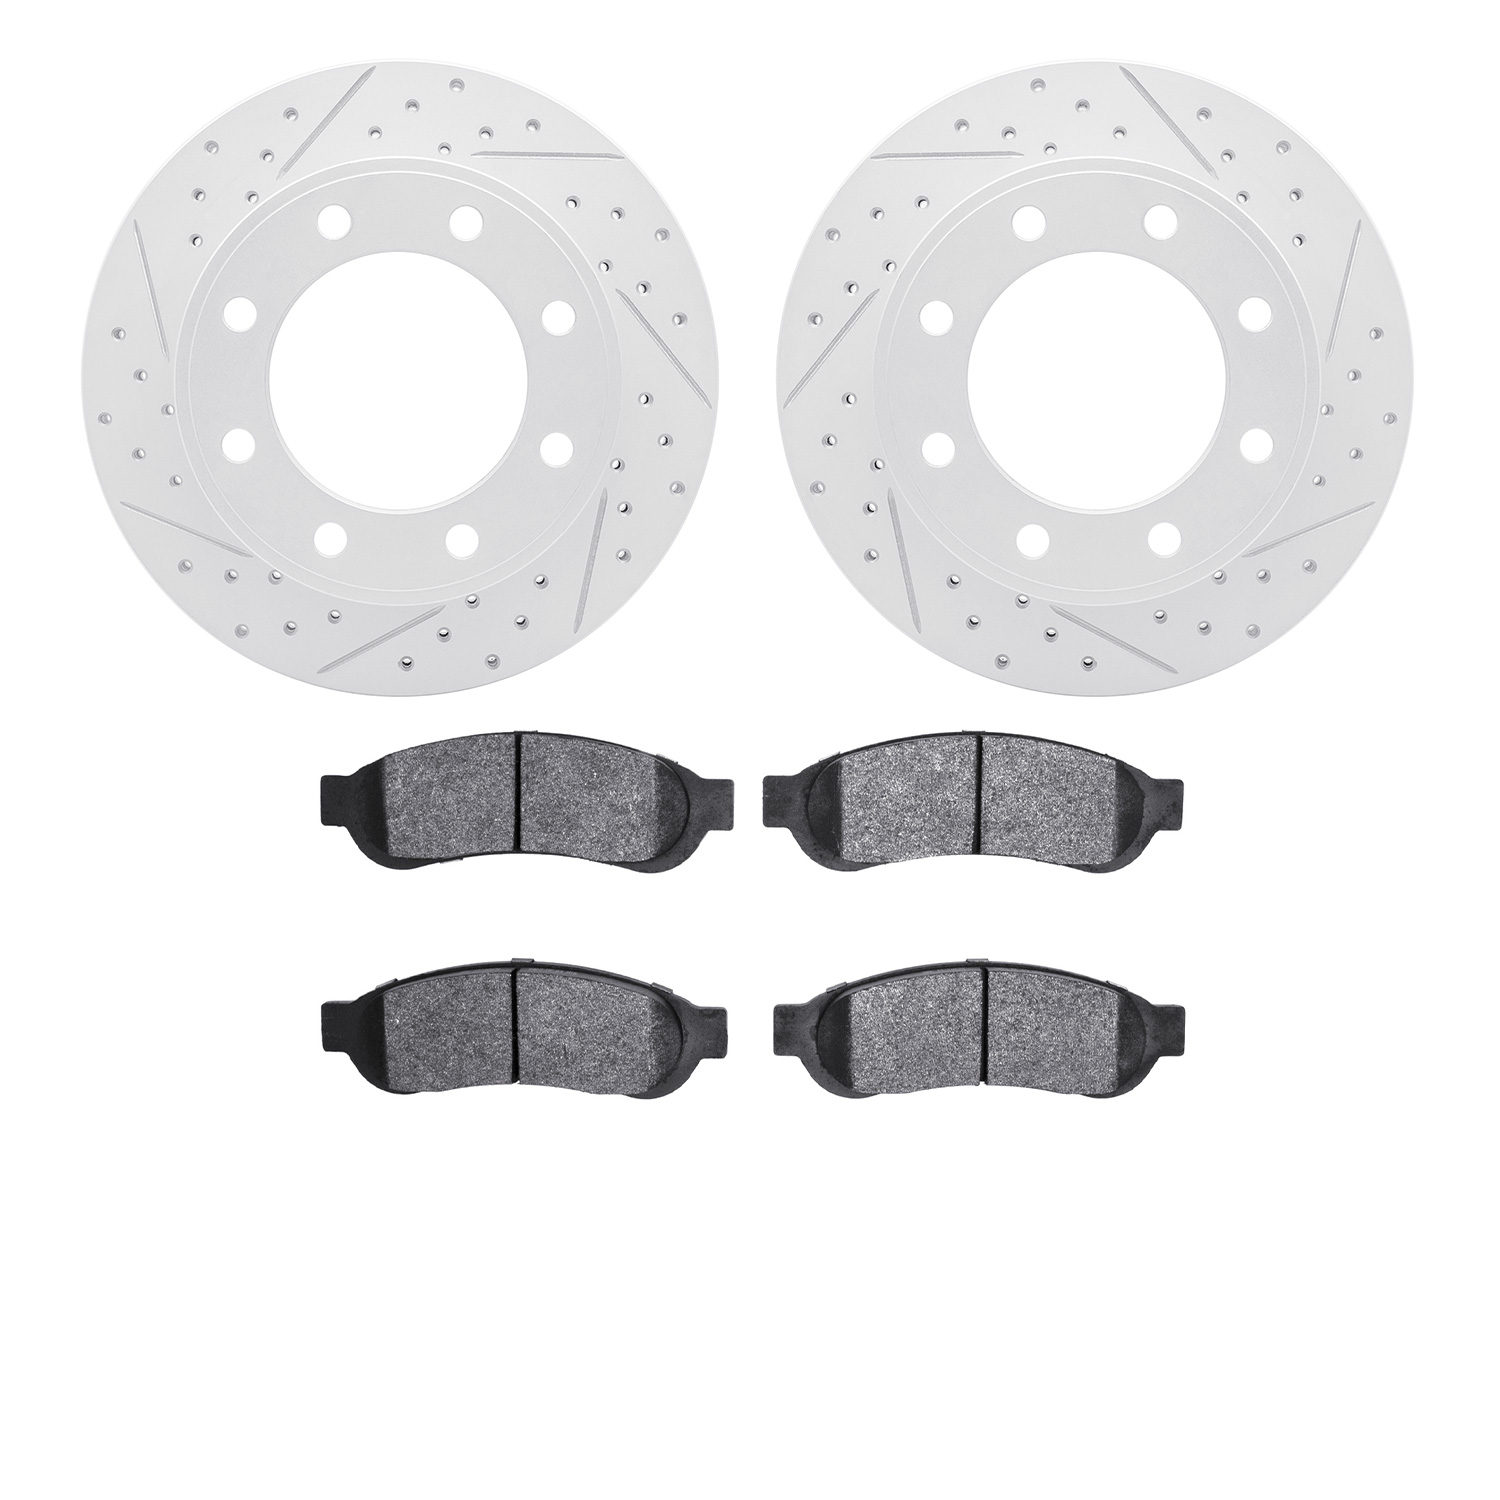 2202-99152 Geoperformance Drilled/Slotted Rotors w/Heavy-Duty Pads Kit, 2006-2010 Ford/Lincoln/Mercury/Mazda, Position: Rear